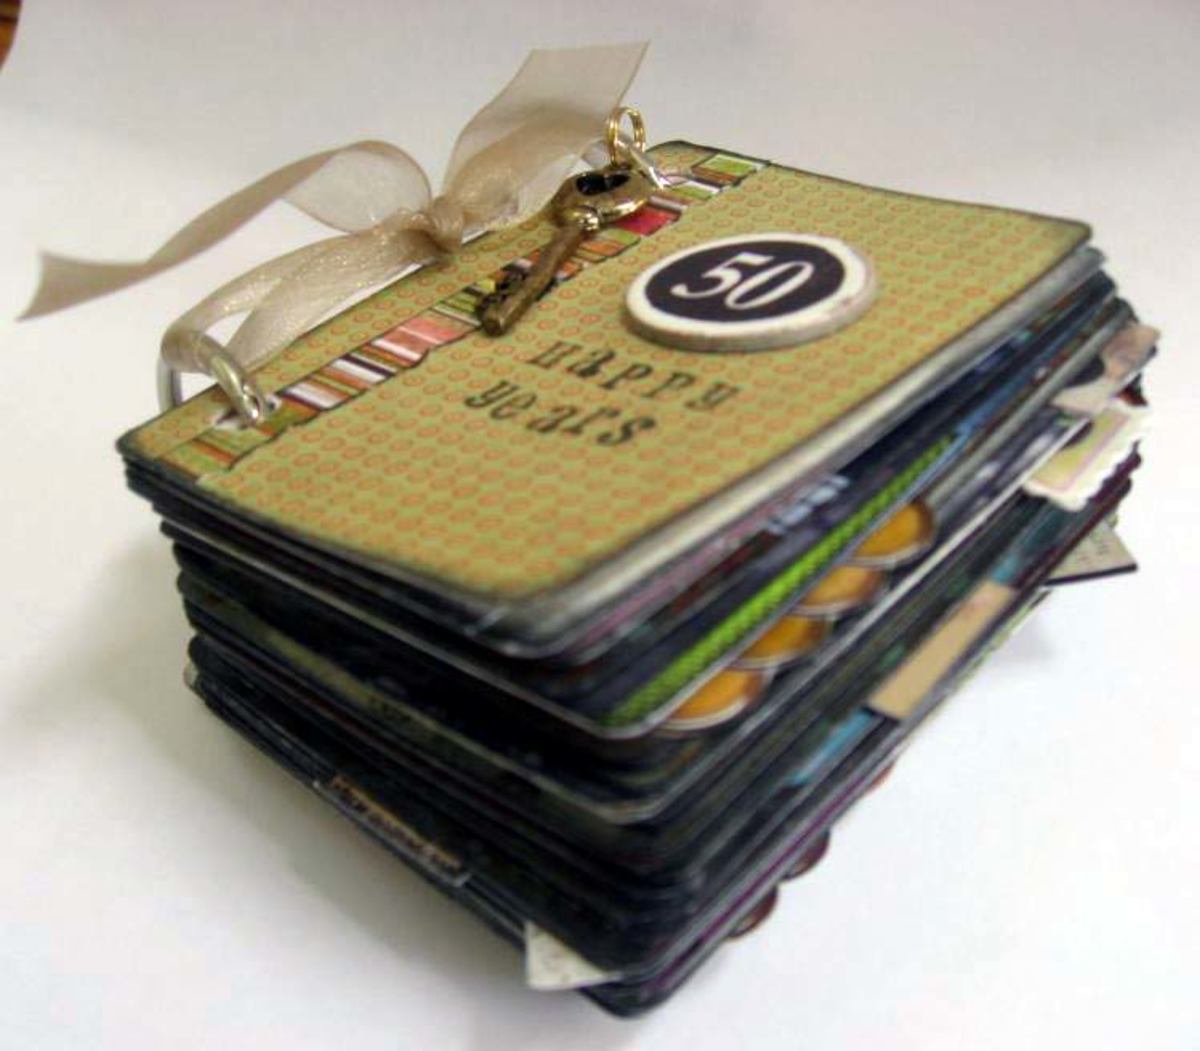 Miniature art book made from a deck of playing cards.